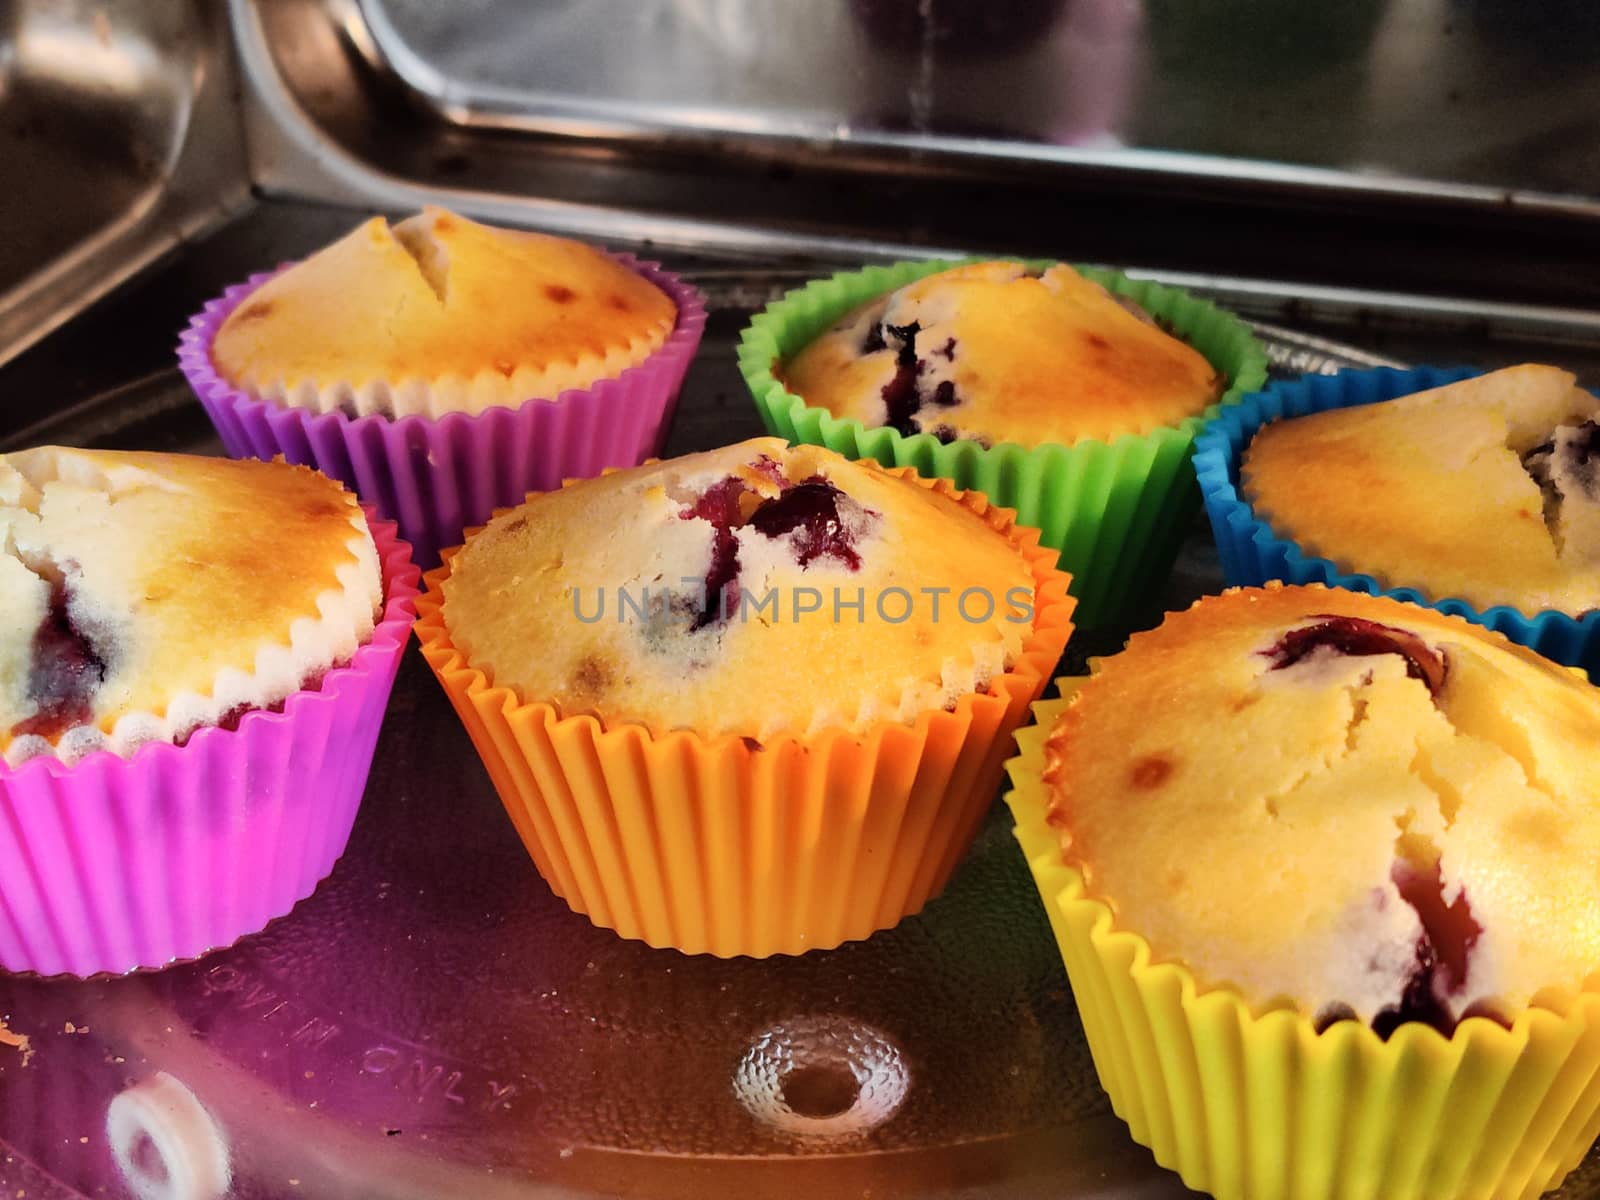 Freshly baked at home muffins in colorful cups placed in a shiny microwave by Shalinimathur